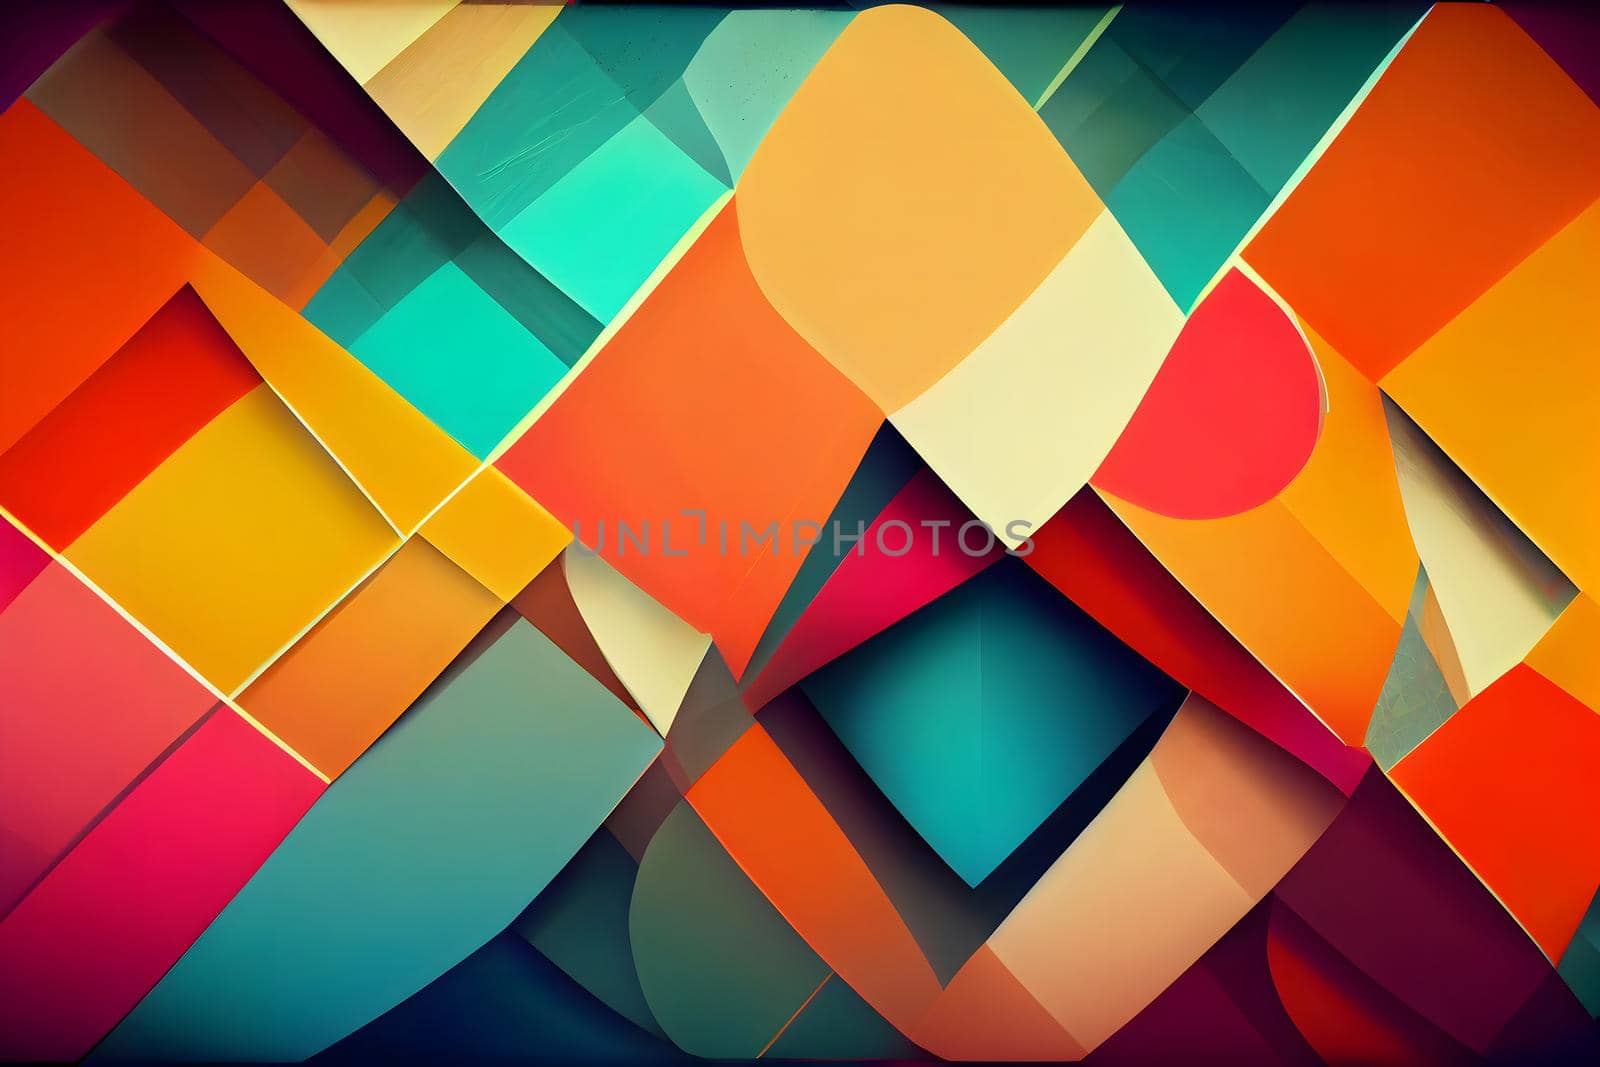 abstract flat colorful geometric background, neural network generated art. Digitally generated image. Not based on any actual scene or pattern.